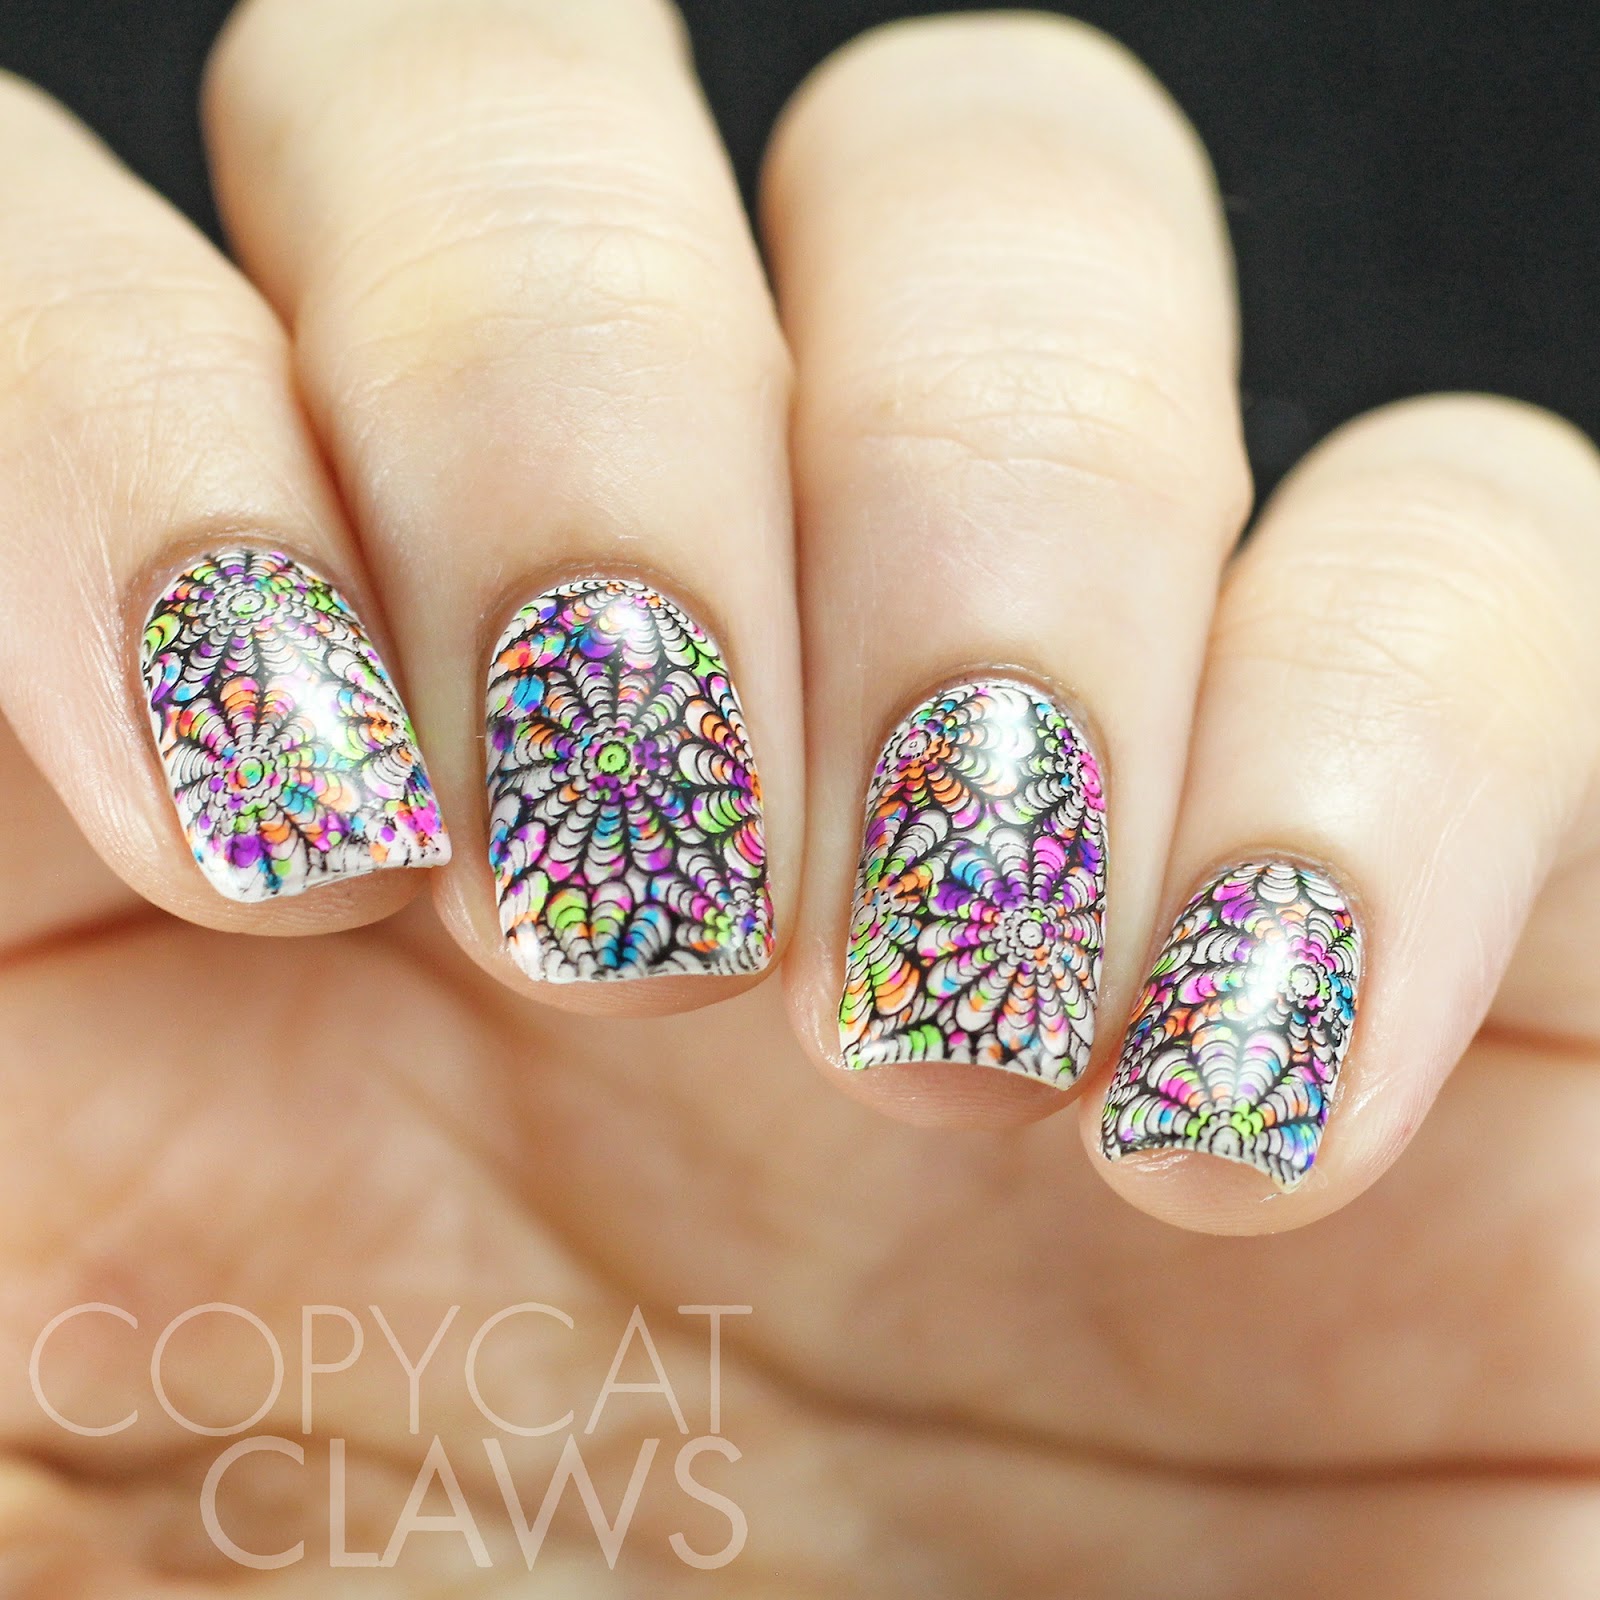 Copycat Claws: UberChic Beauty UC 3-01 Stamping Plate Review